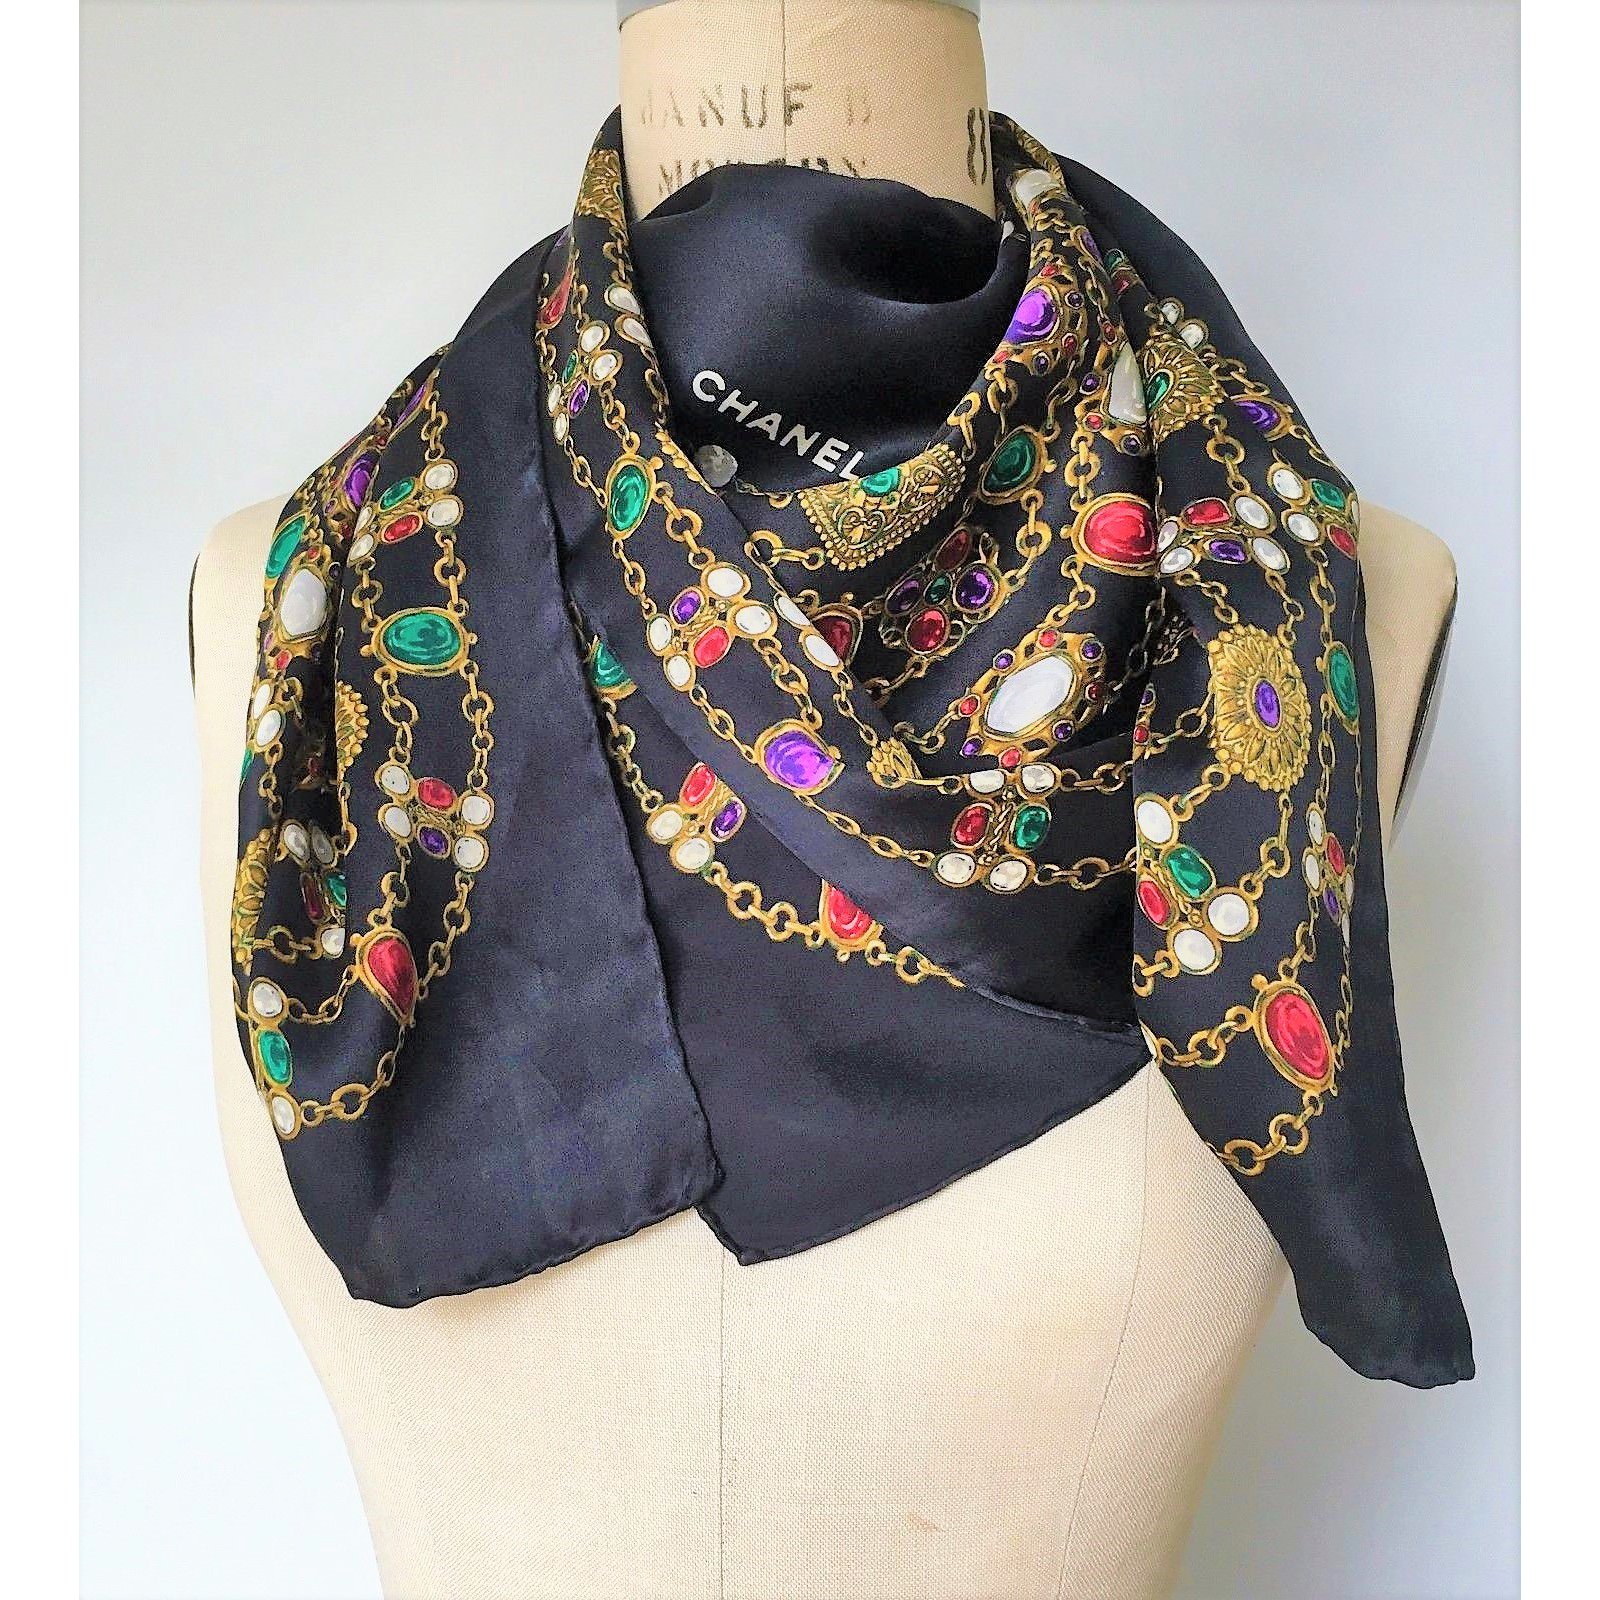 Chanel Black Jewels & Gold Chains Silk Scarf